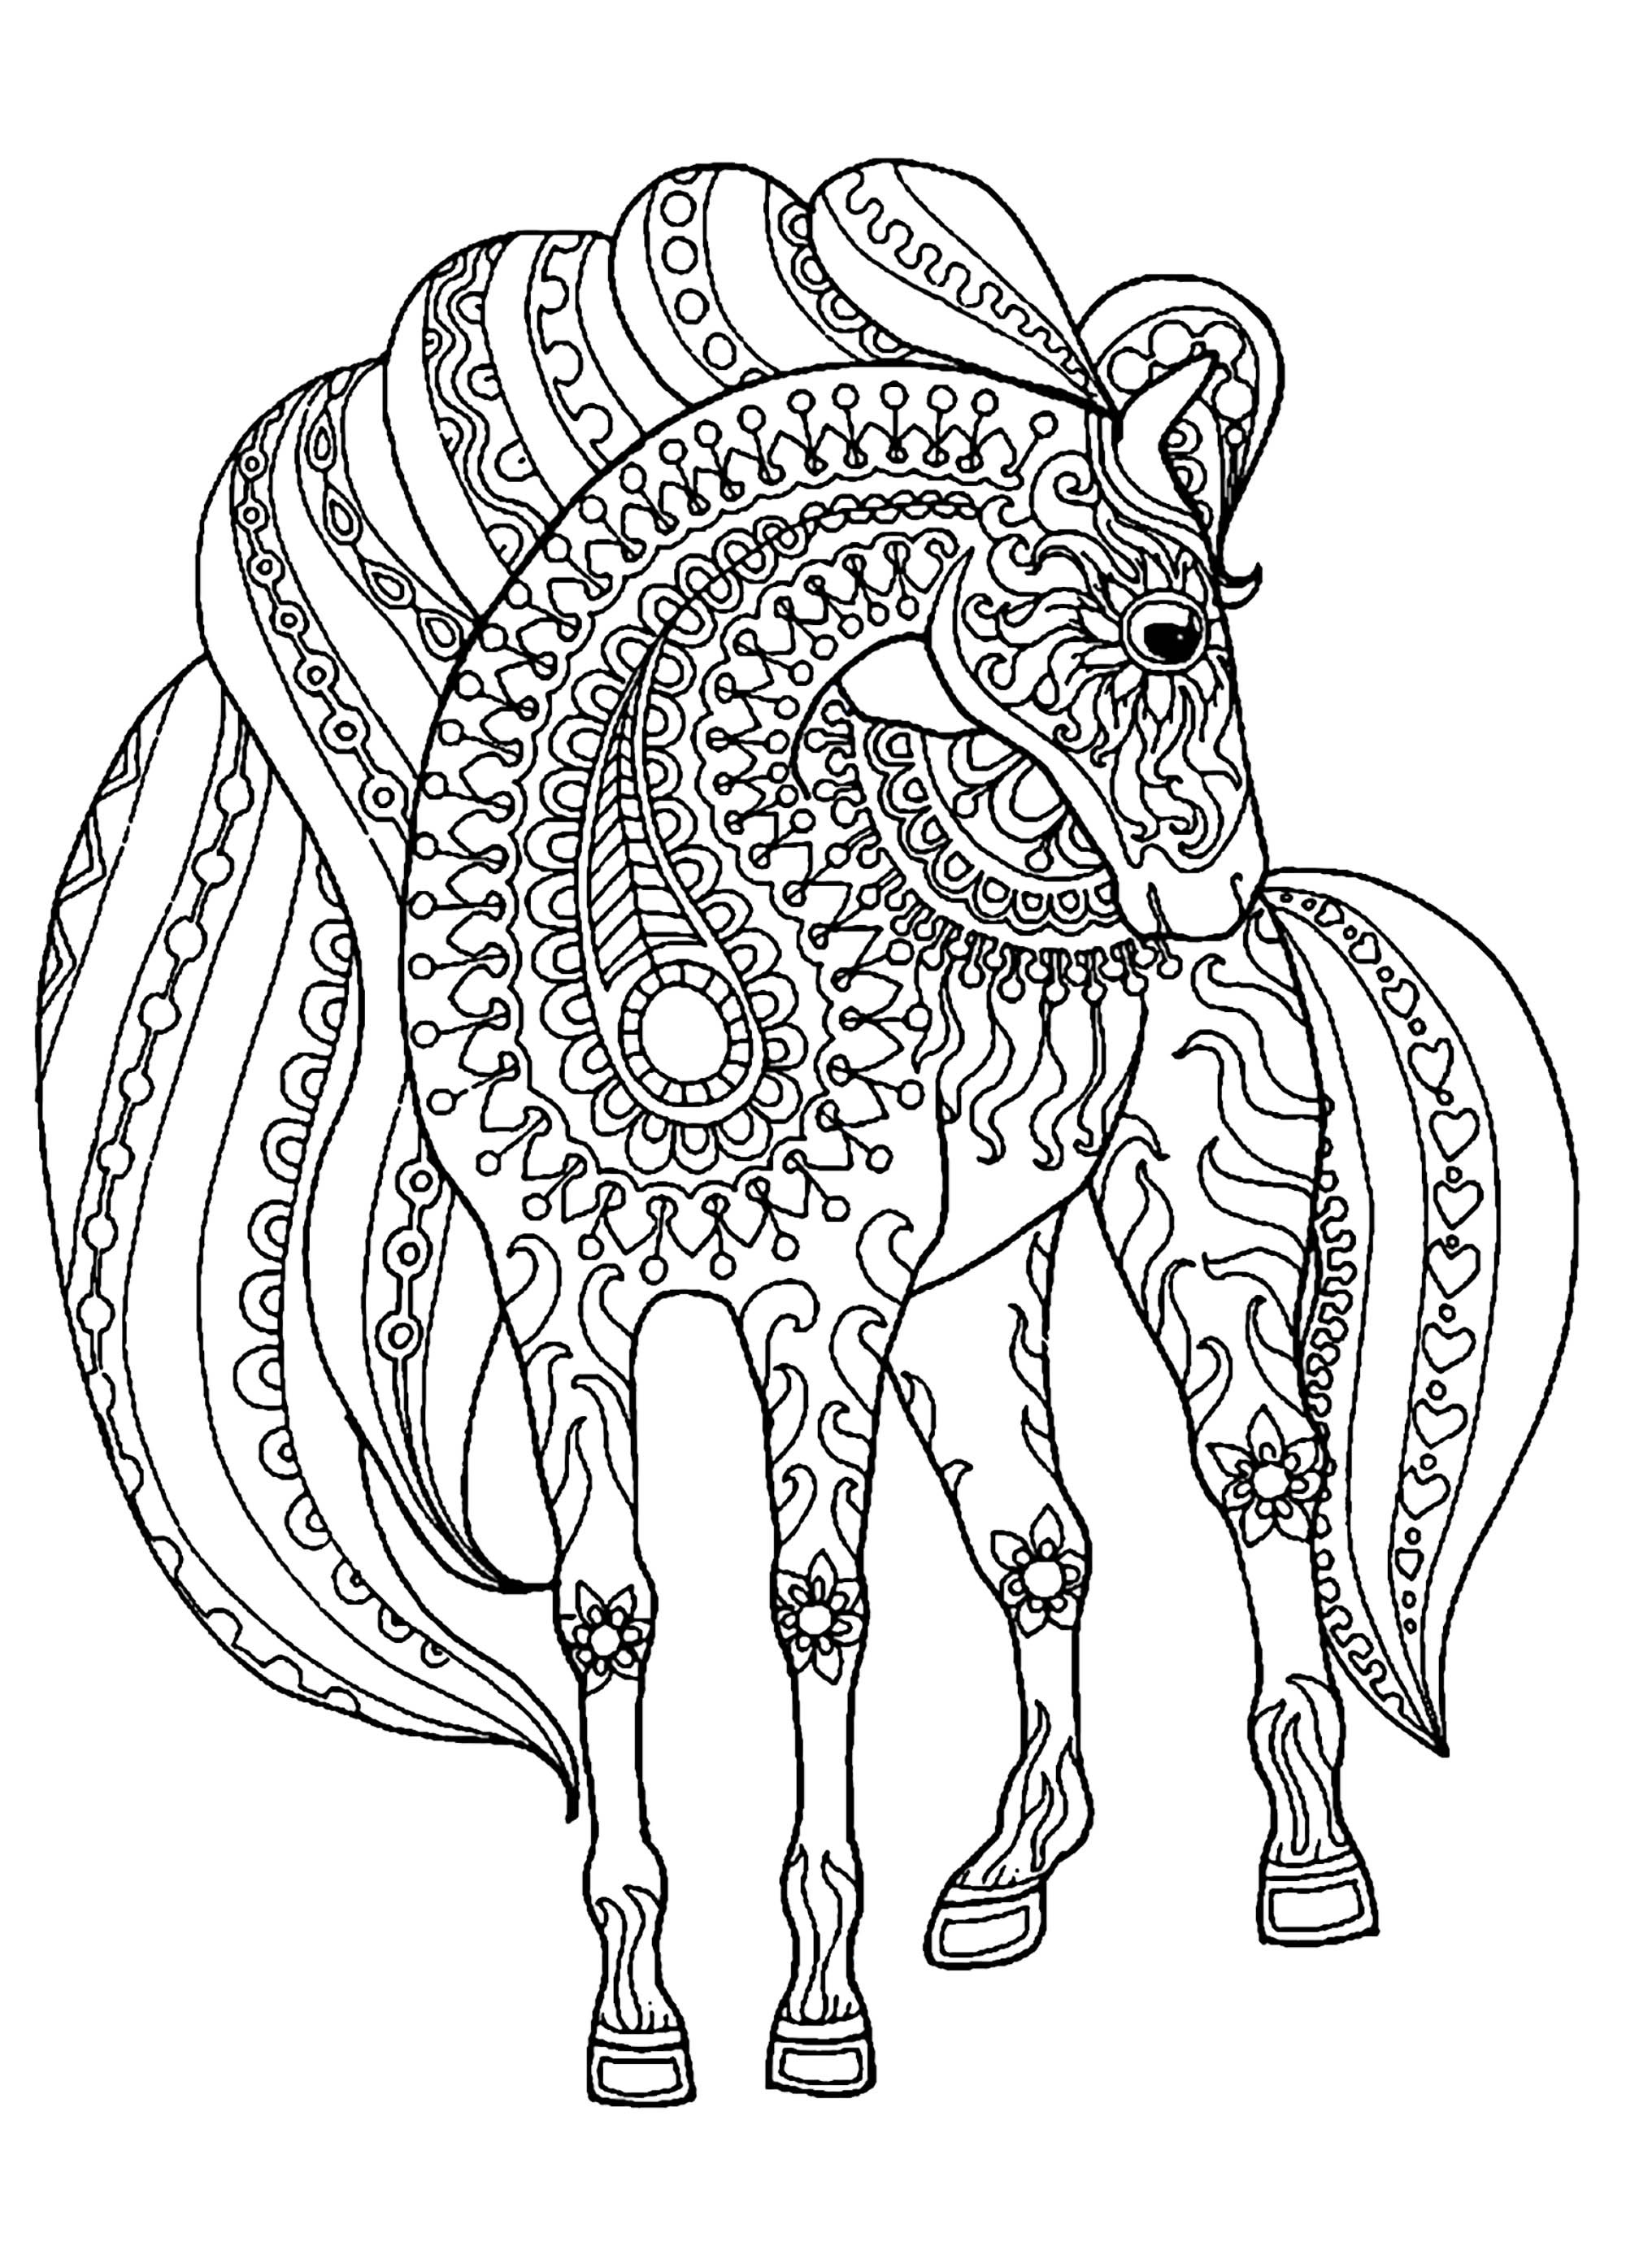 Free Printable Horse Coloring Pages For Adults
 Horse simple zentangle patterns Horses Adult Coloring Pages